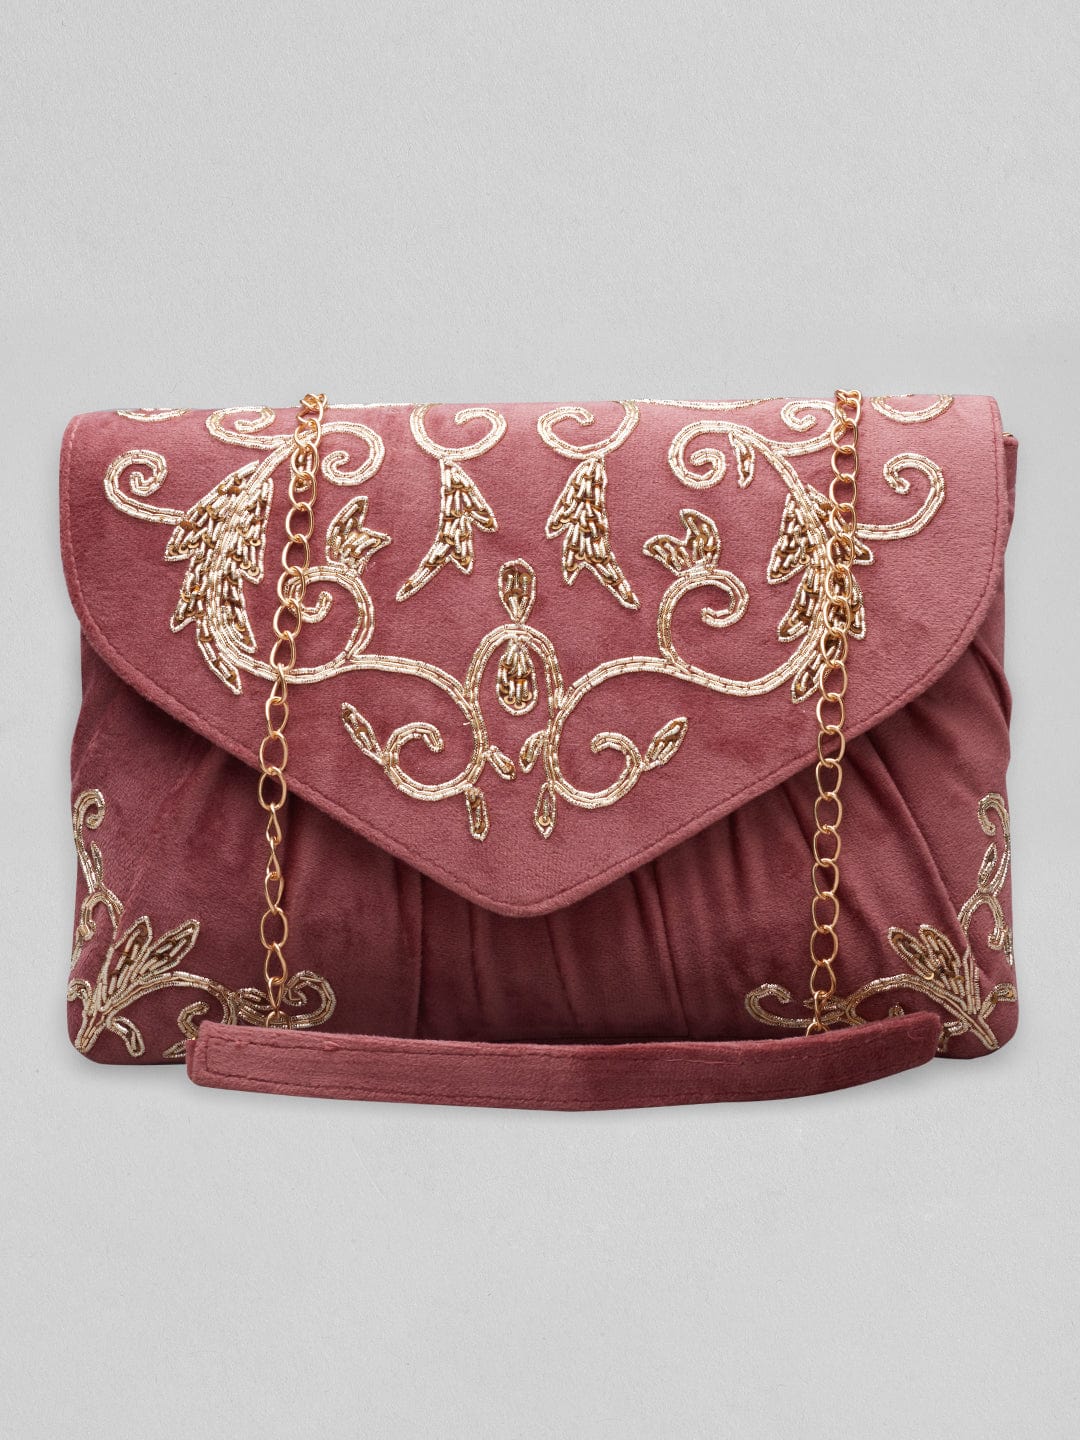 Rubans Dusky Pink Colour Handbag With Embroided Gold And Brown Design. Handbag & Wallet Accessories